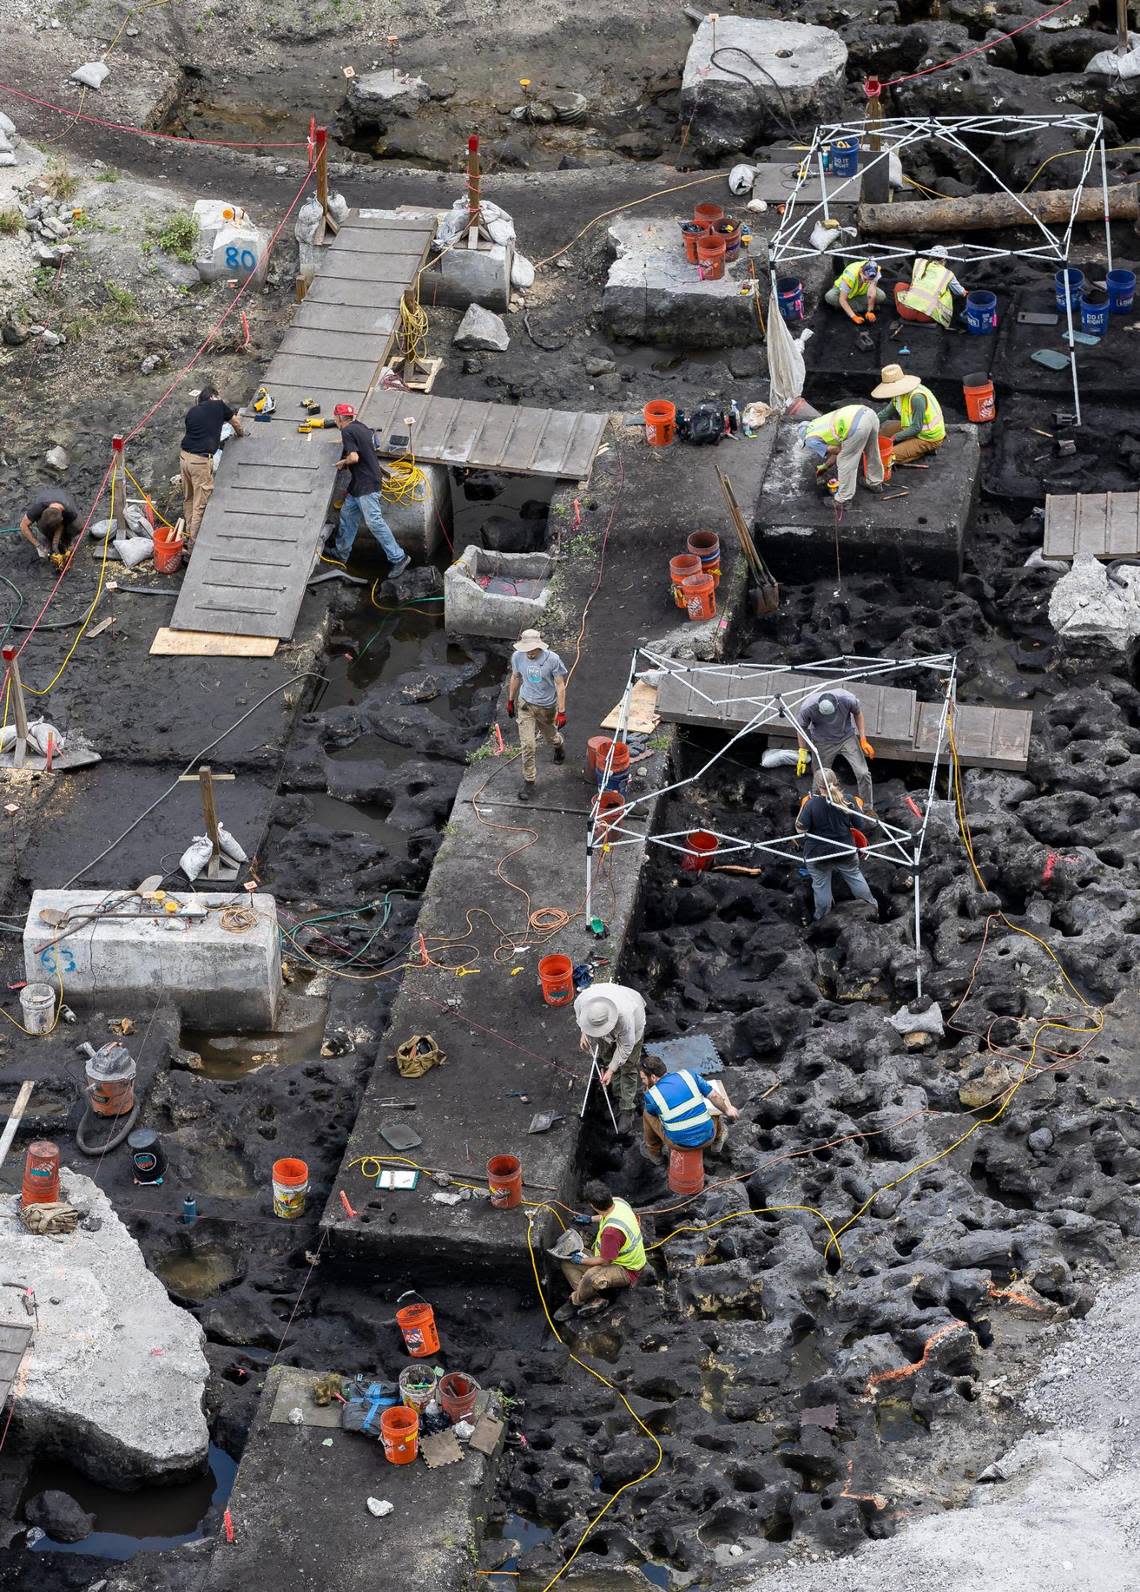 Members of an archaeological team work at the site of a planned Related Group residential tower complex in Brickell at the mouth of Miami River. The team has unearthed extensive evidence of prehistoric indigenous settlement on the site and artifacts dating back to the dawn of human civilization 7,000 years ago.